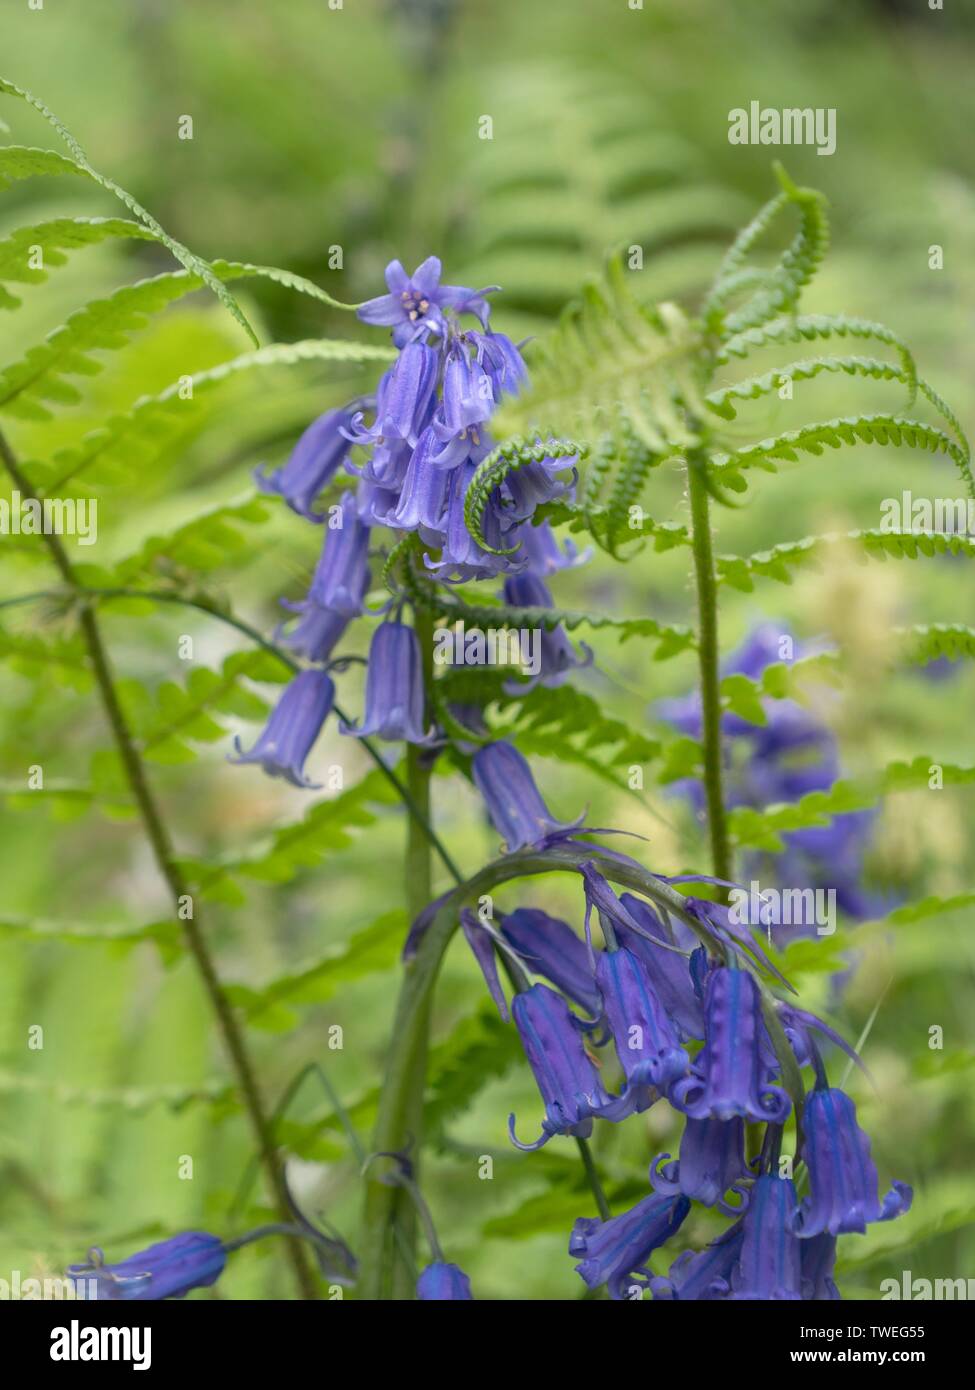 A head of bluebells among ferns in the wild English countryside Stock Photo